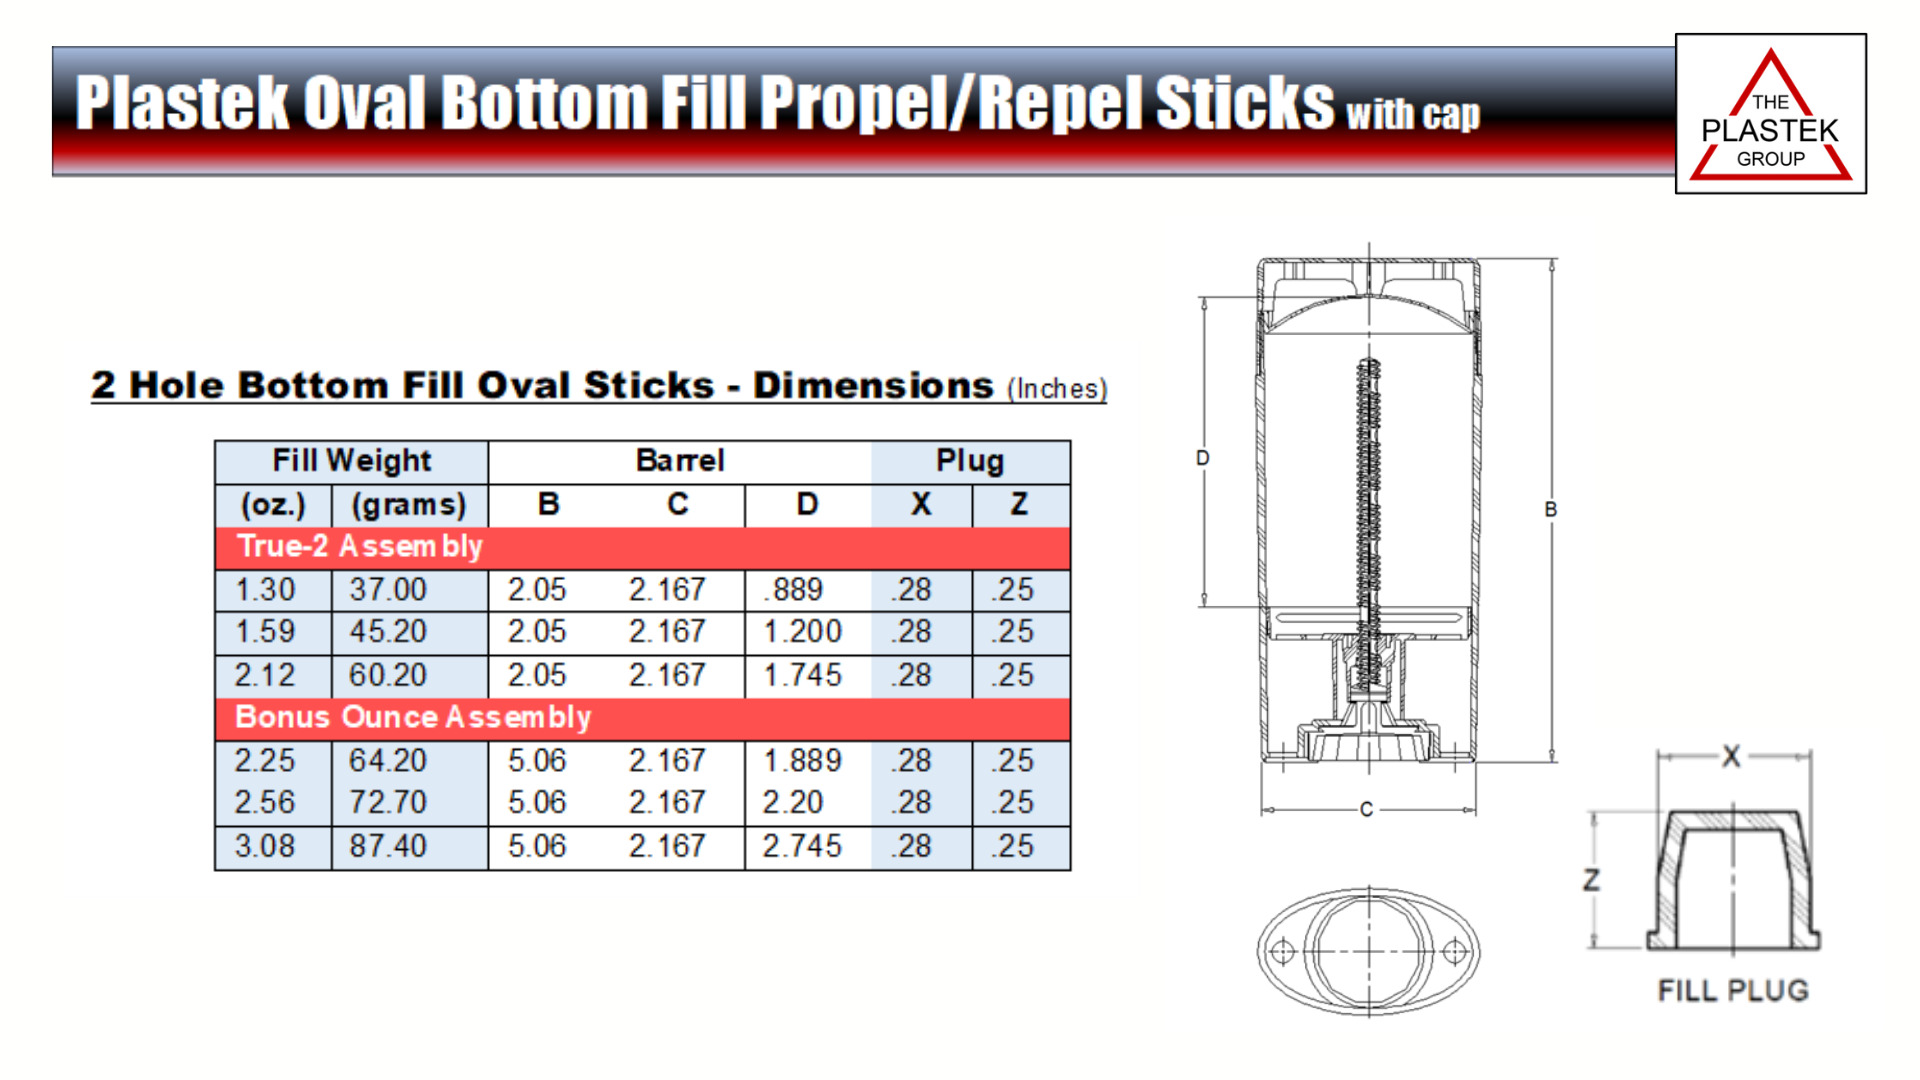 Oval bottom fill stick and cap dimensions